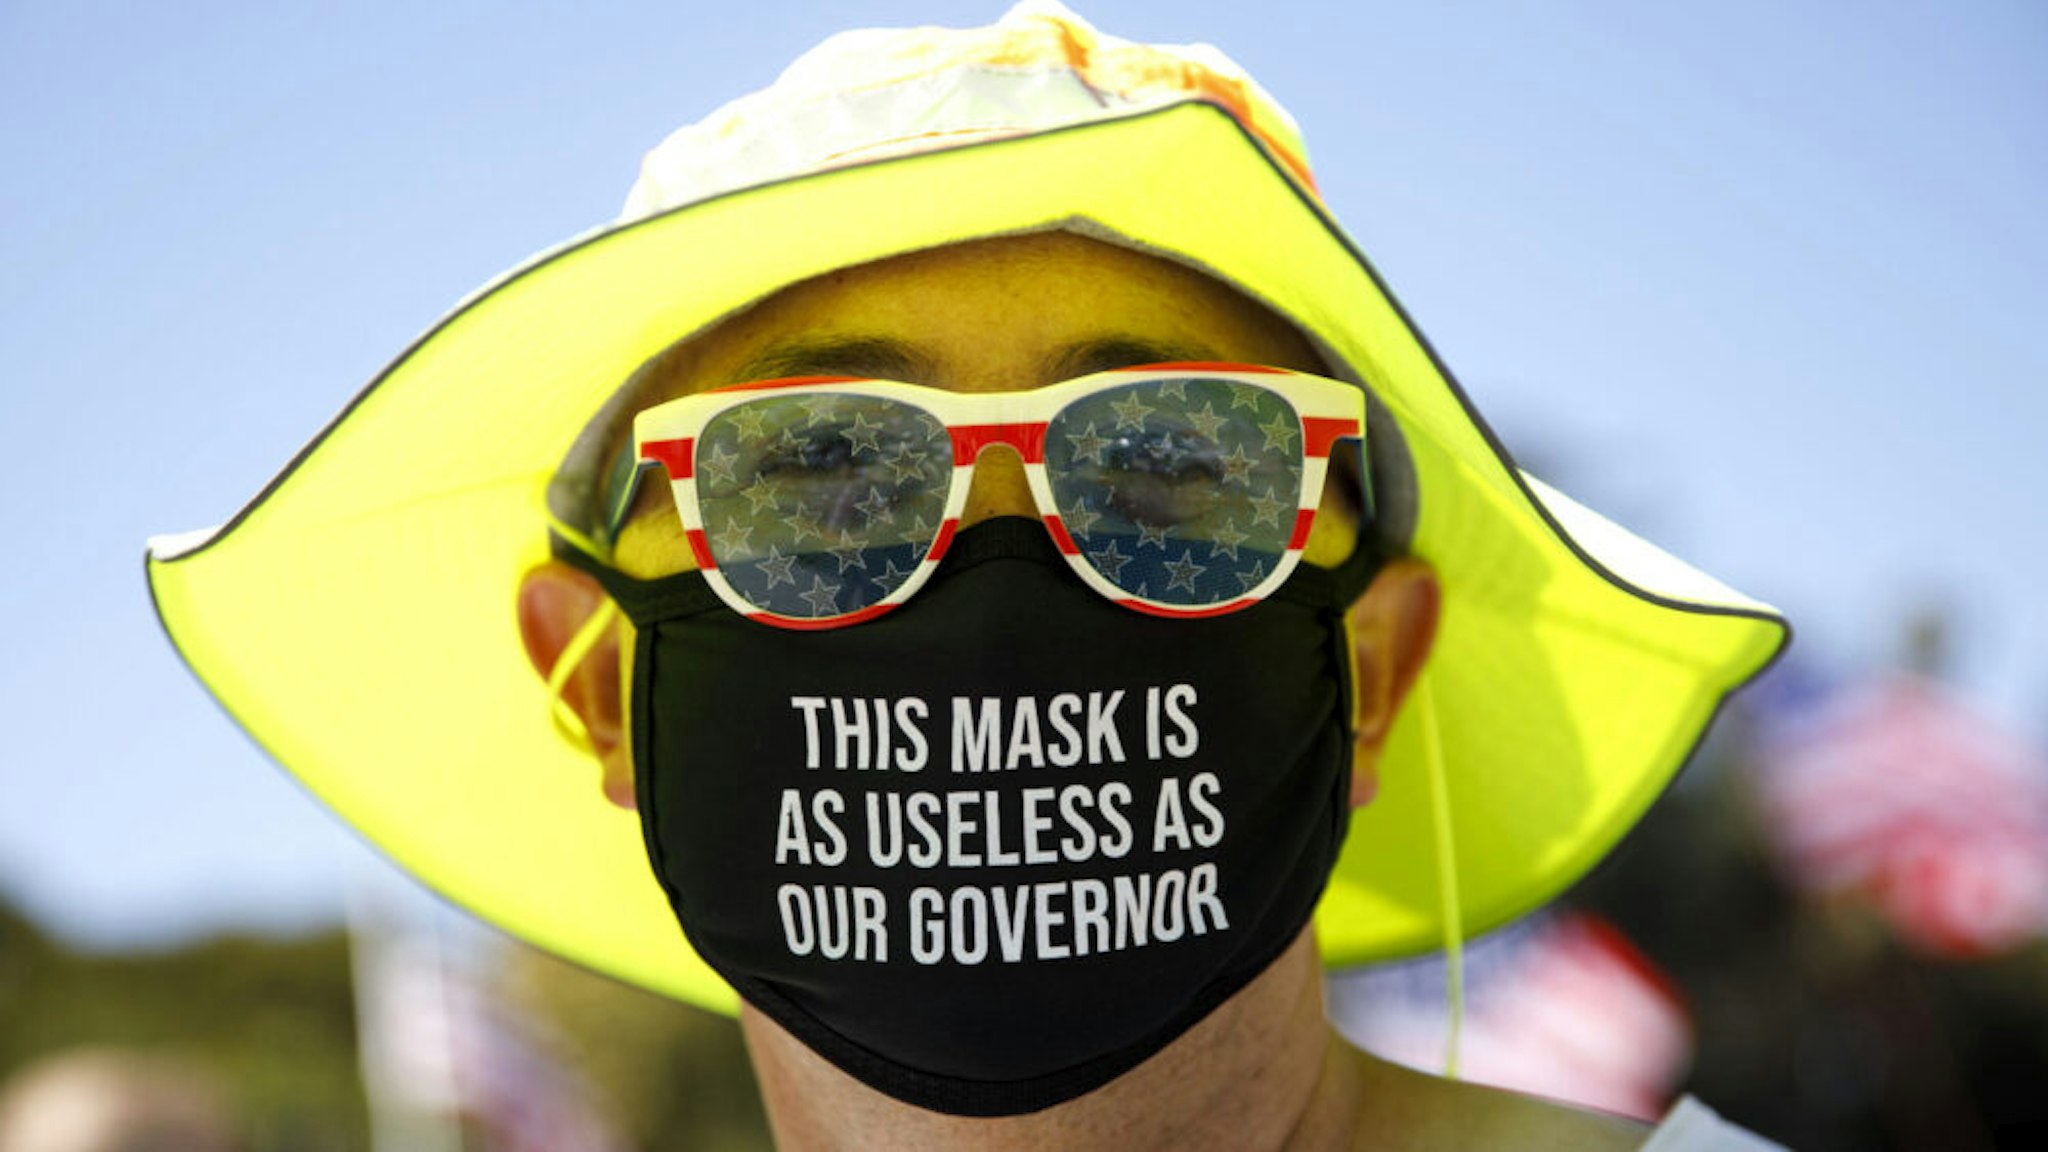 A demonstrator wears a facemask referring to the governor of California during a WalkAway rally in support of the US president on August 8, 2020 in Beverly Hills, California.